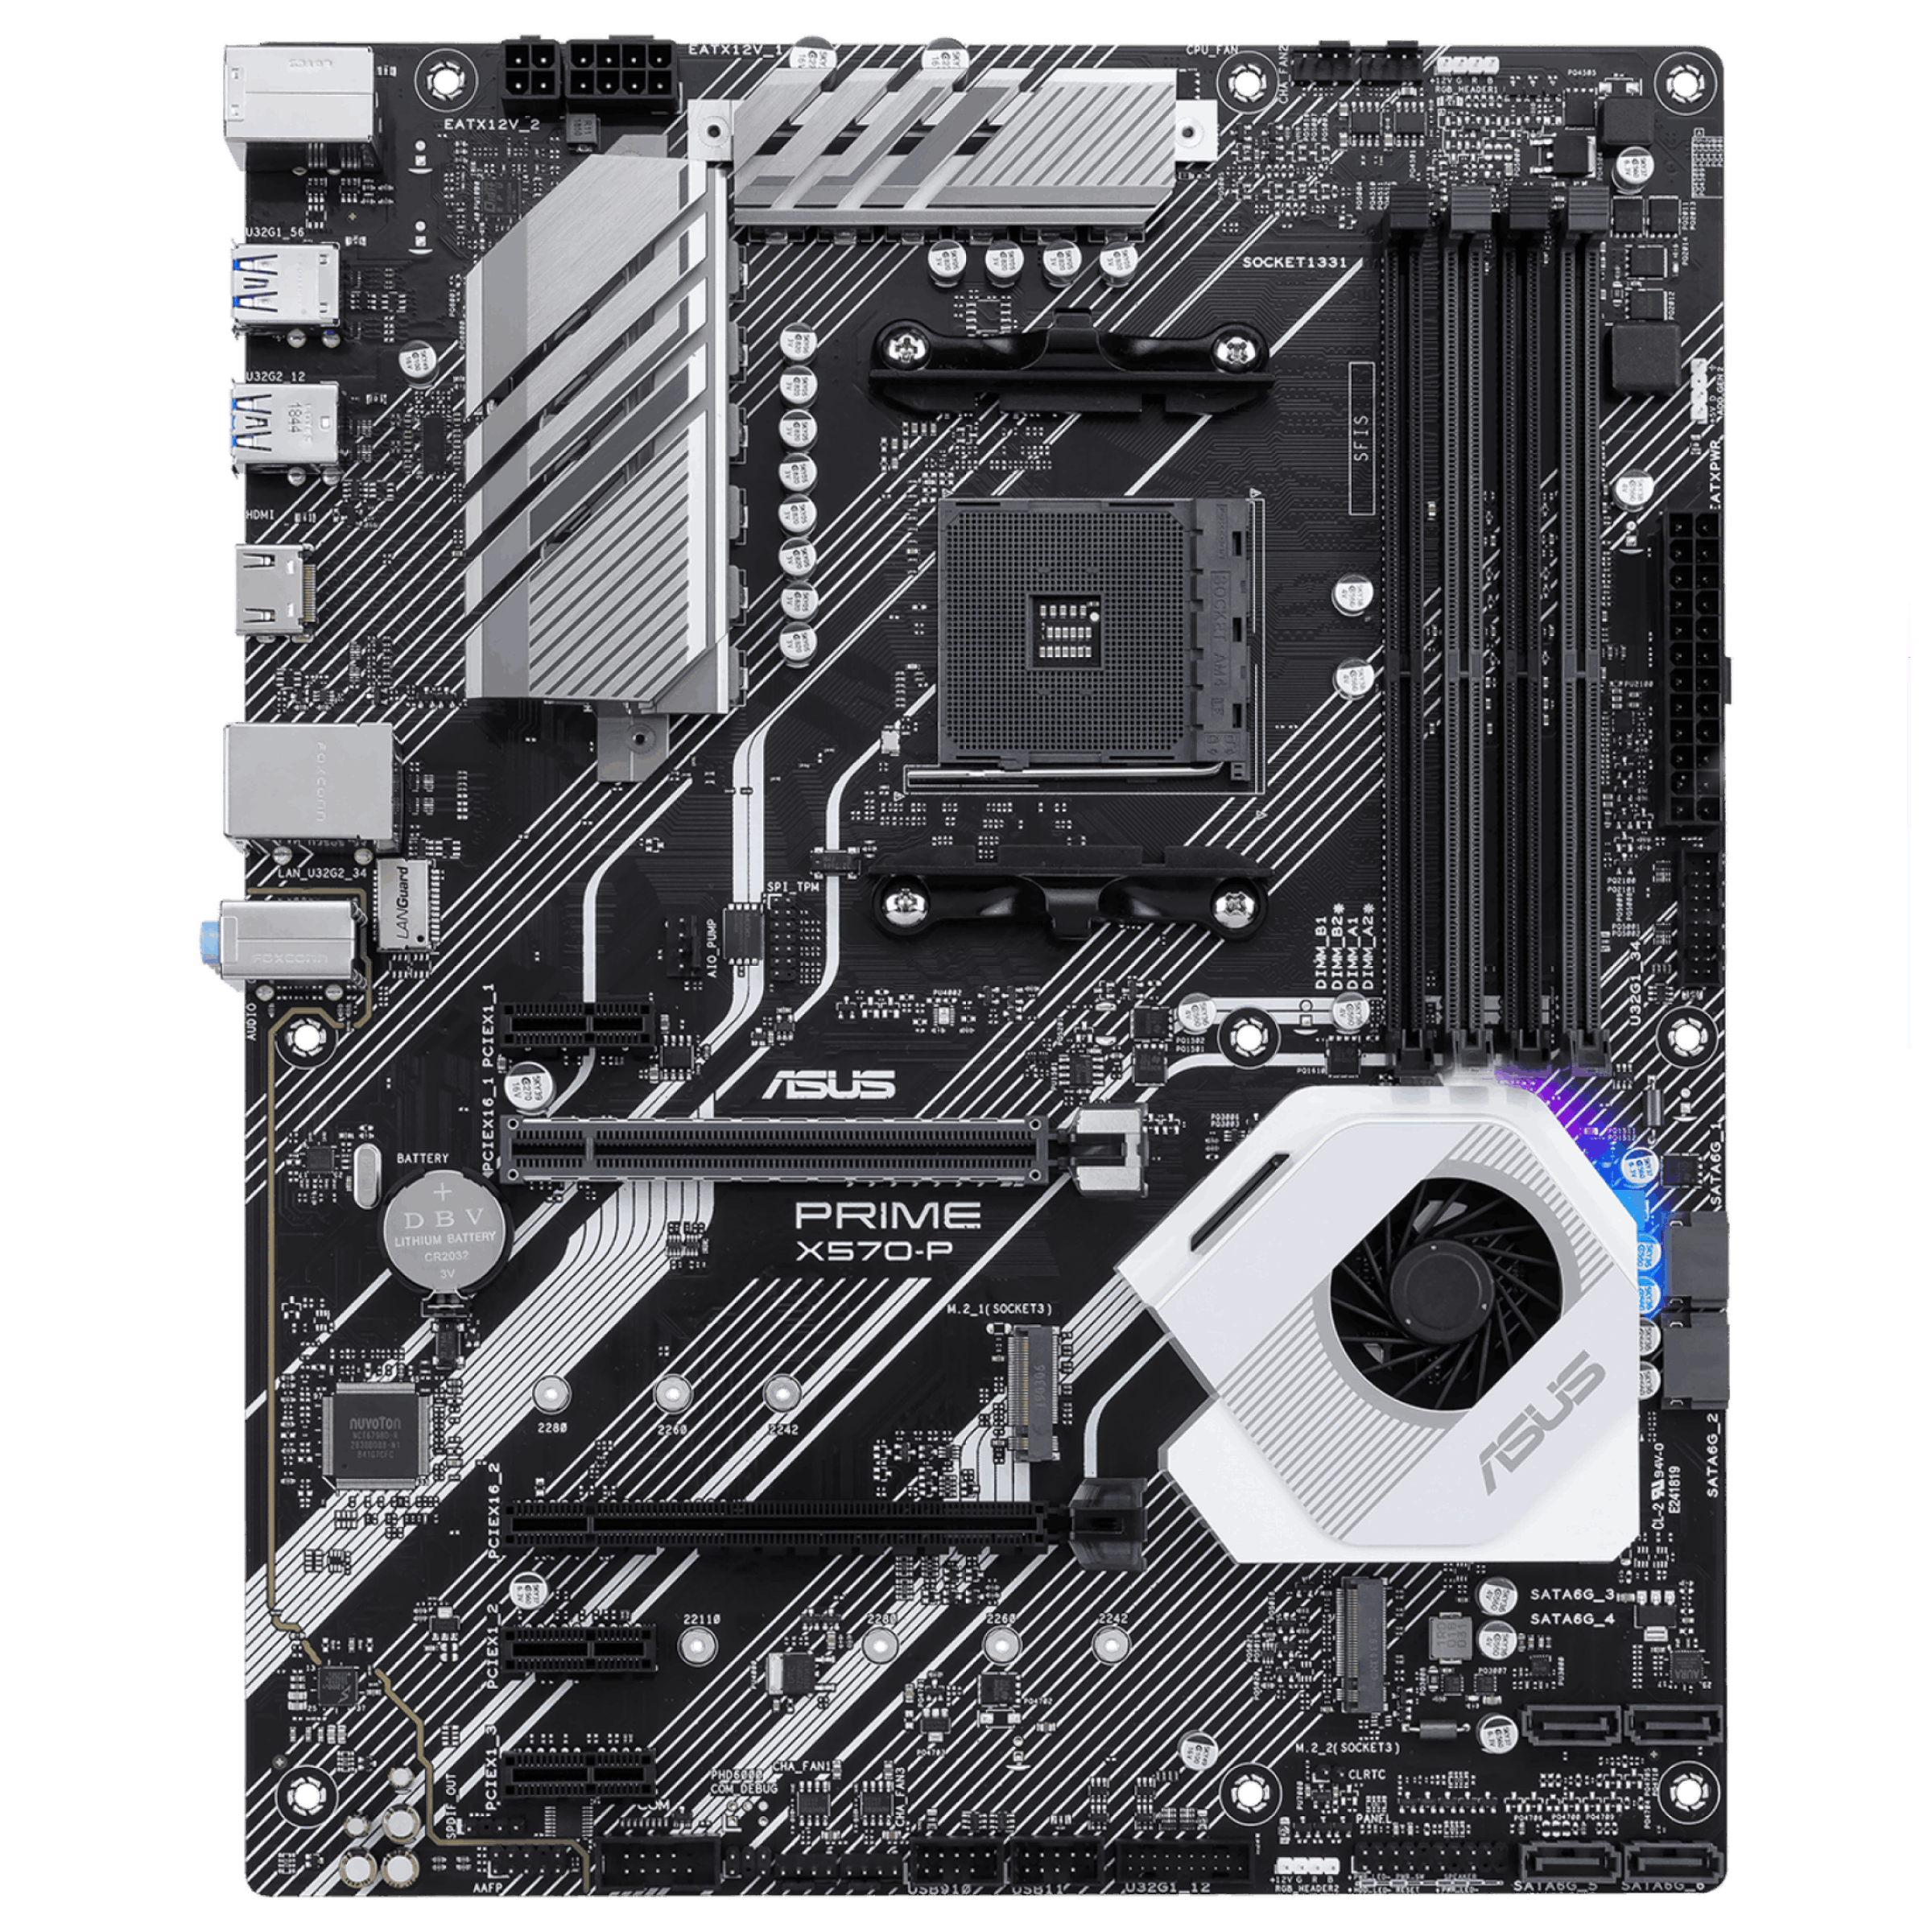 PRIME X570-P｜Motherboards｜ASUS